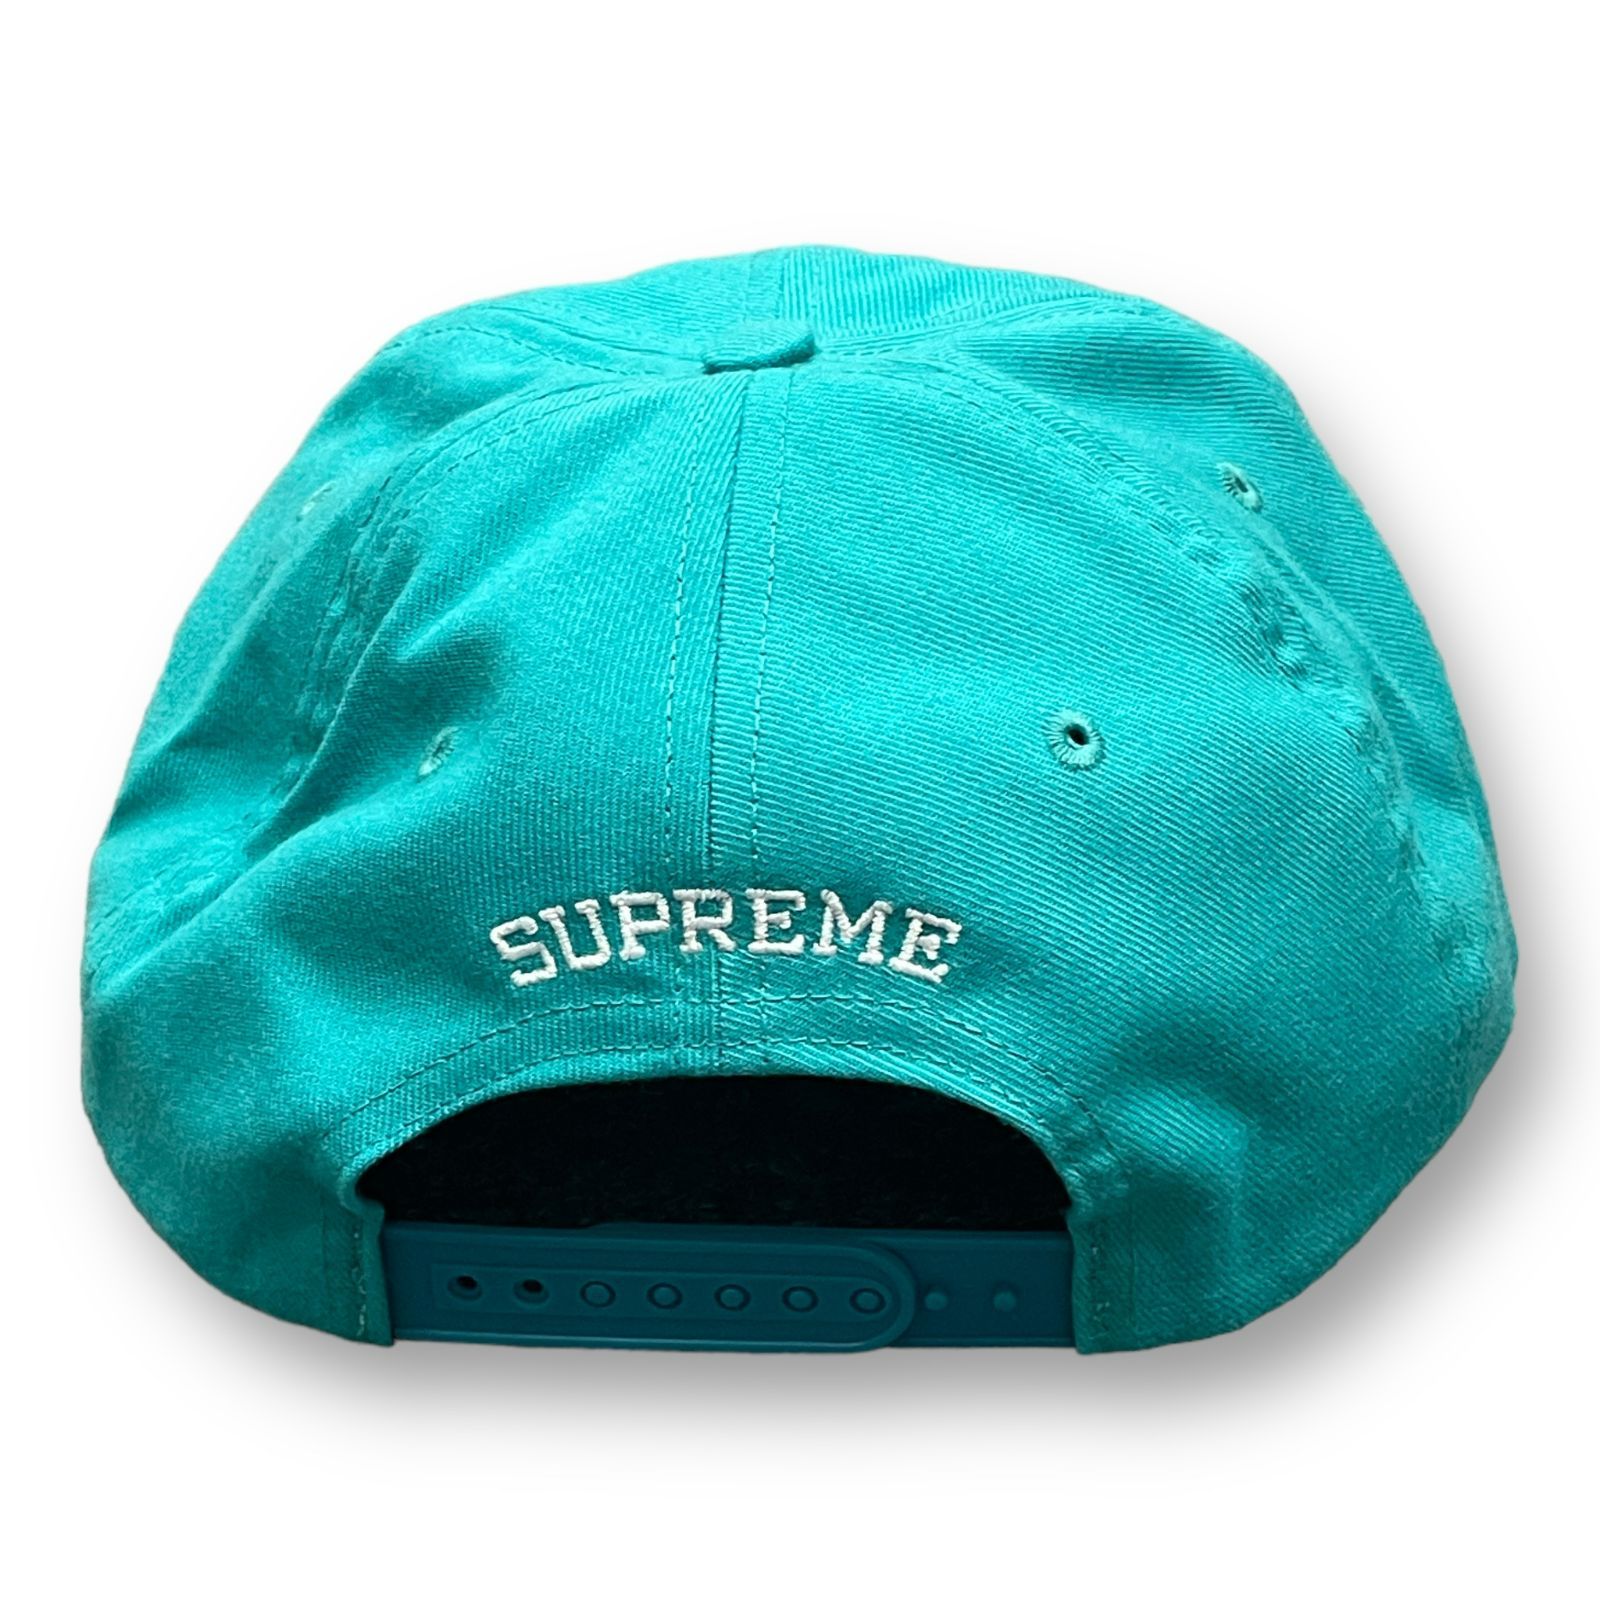 SUPREME 16SS Gonz Butterfly 6-Panel Cap バタフライ キャップ ロゴ 